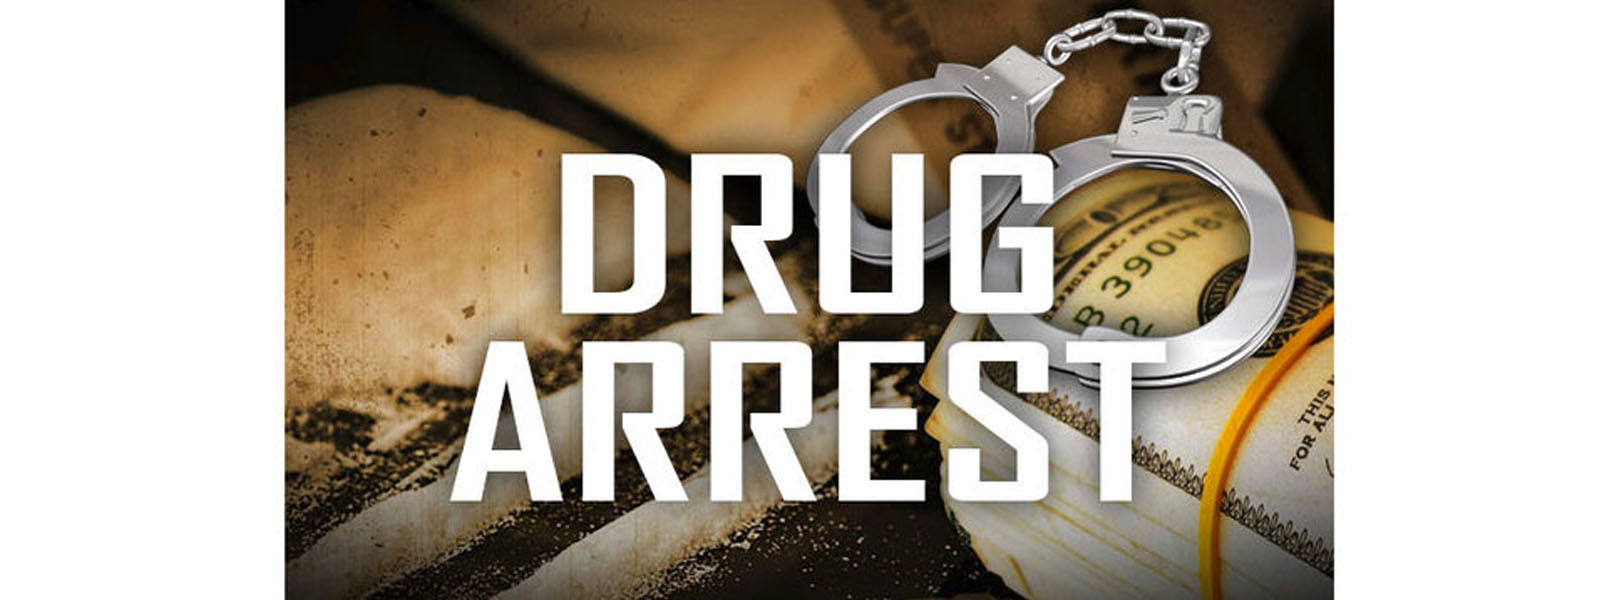 Four arrested in heroin raid 